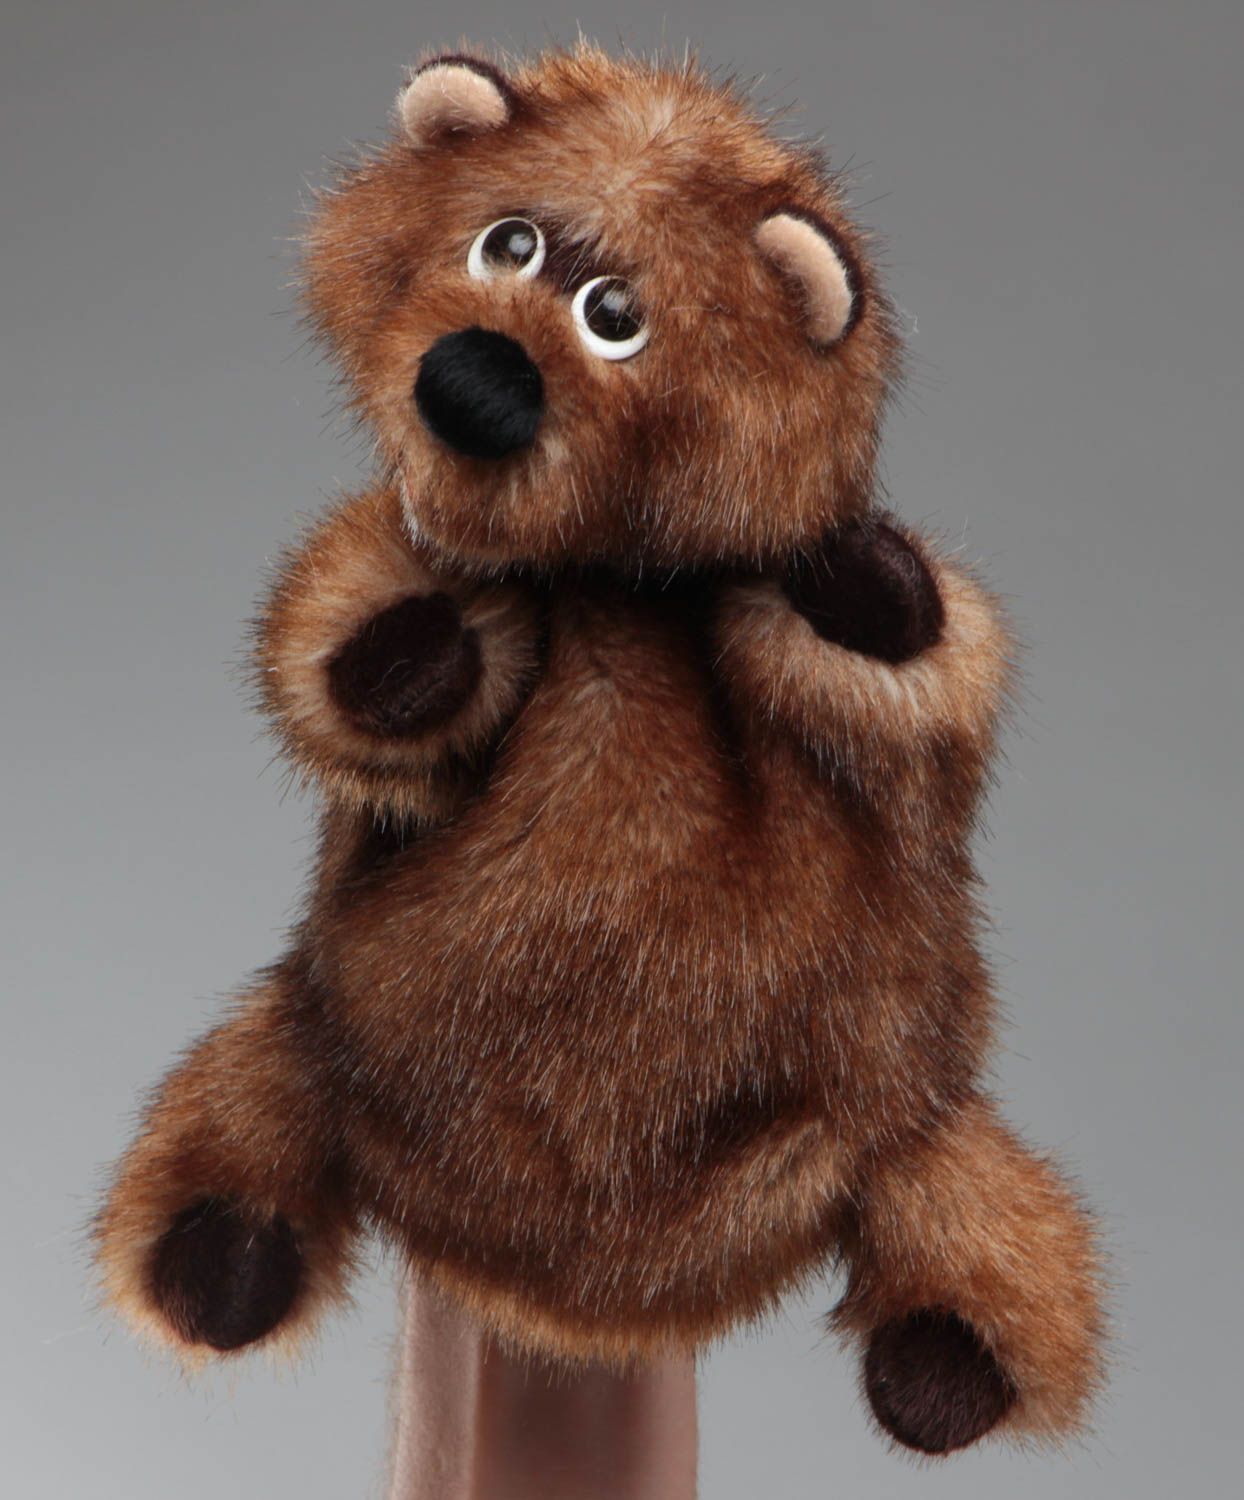 Handmade soft glove toy sewn of brown faux fur bear cub for puppet theater photo 5